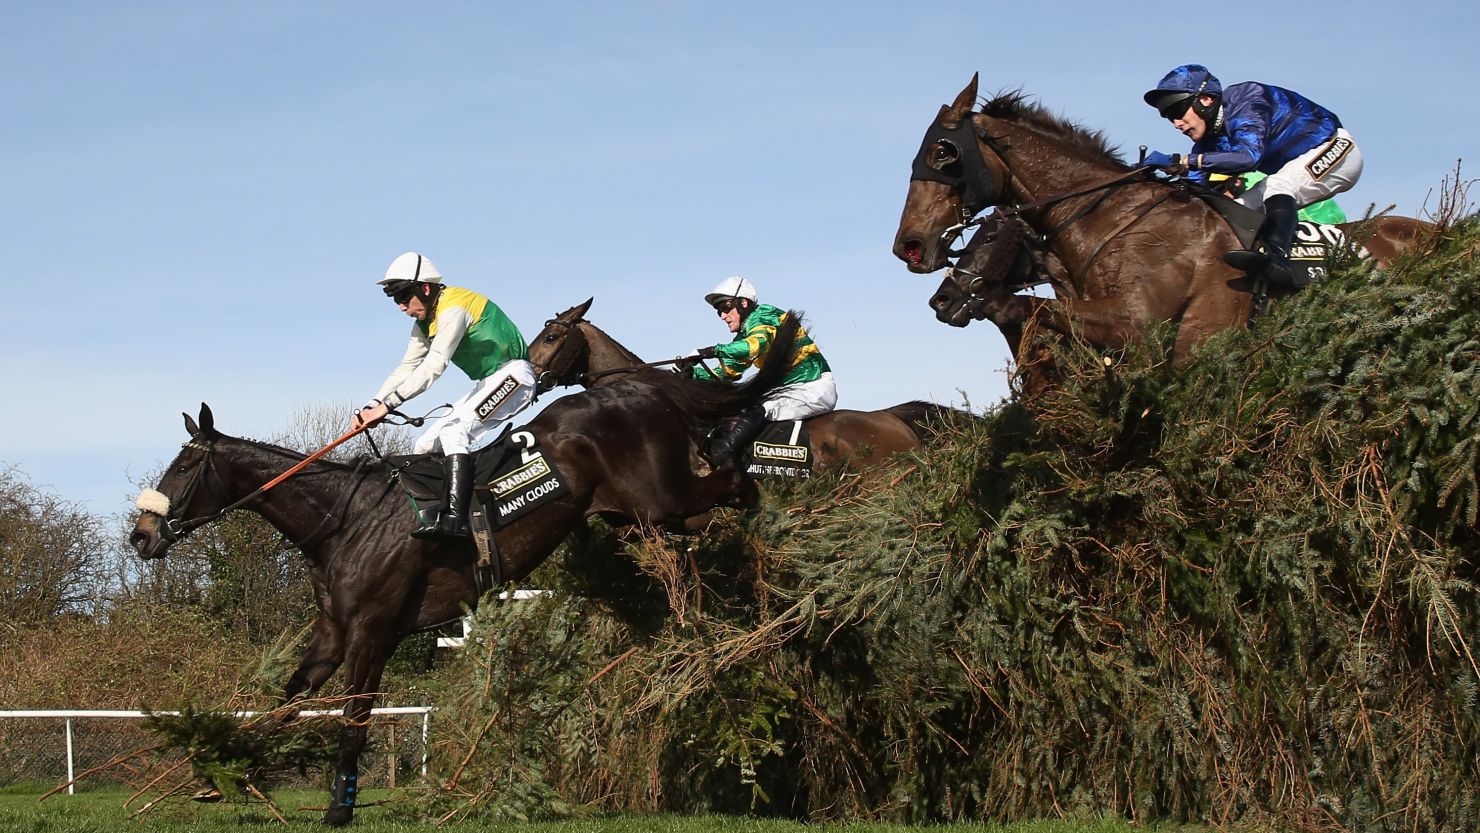 25-1 shot Many Clouds won the Grand National on Saturday.